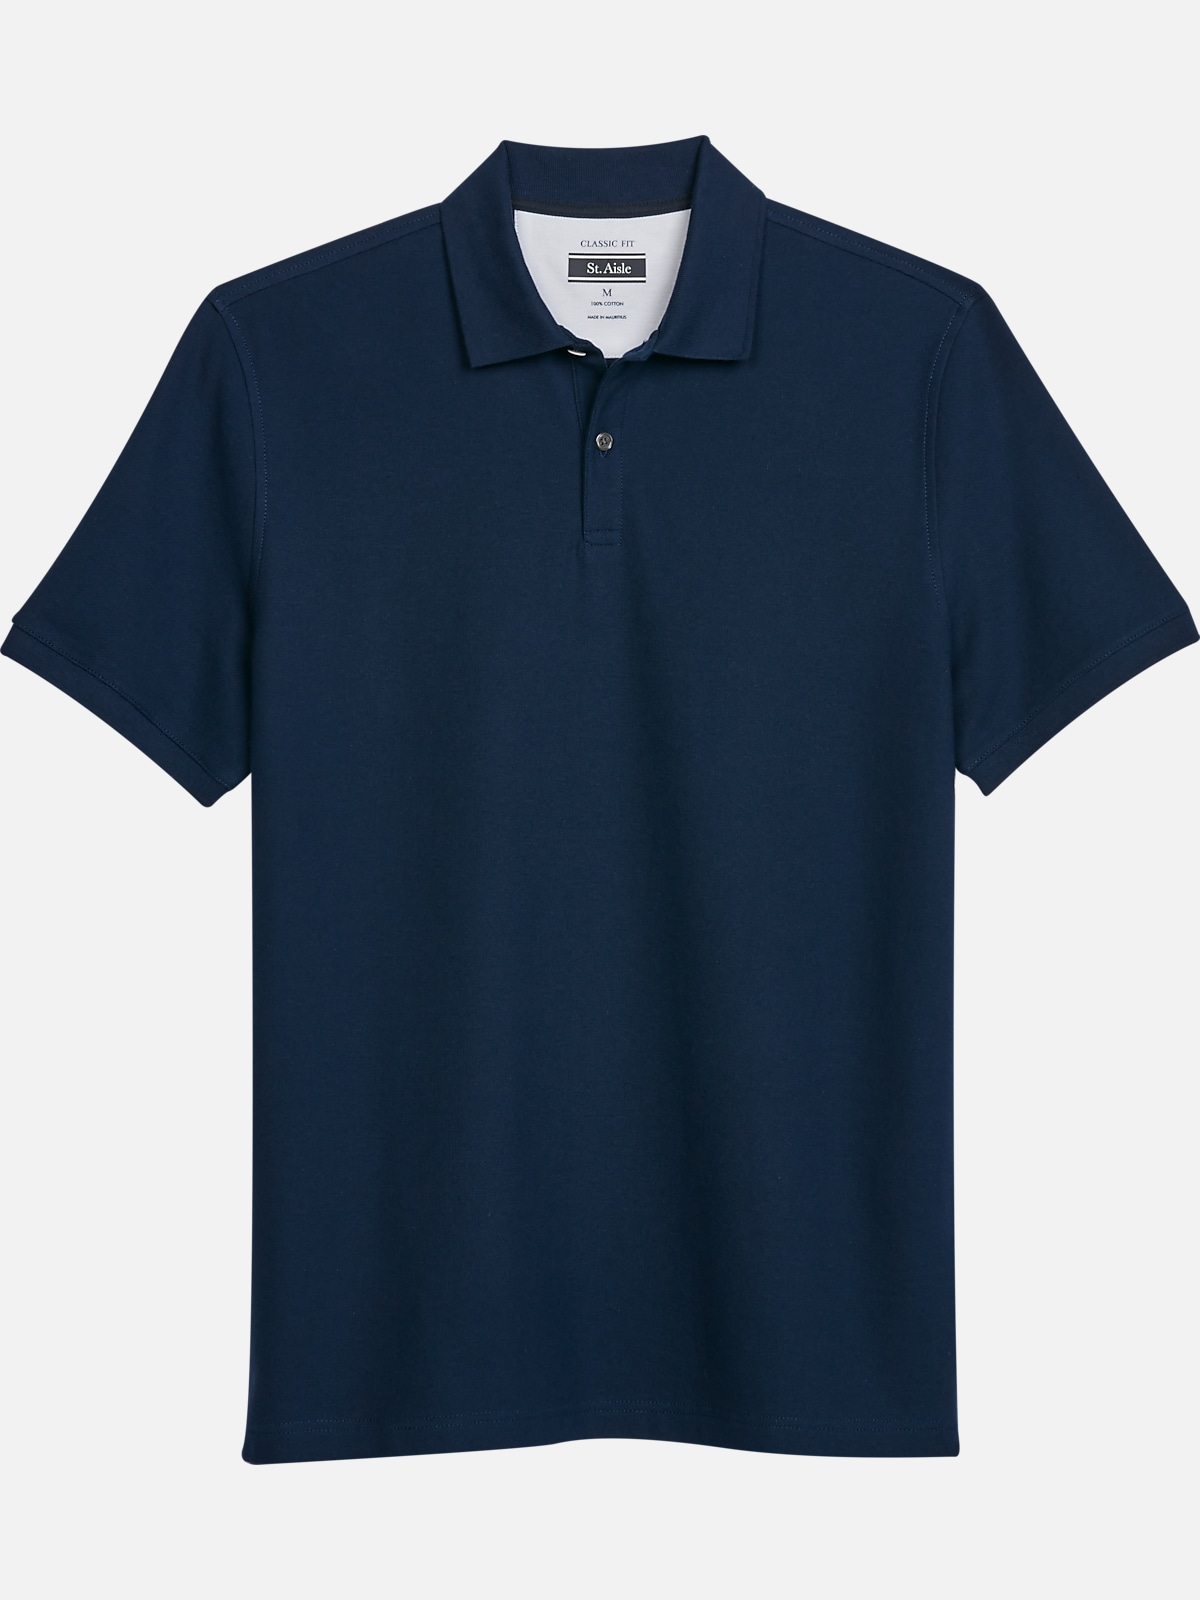 St. Aisle Classic Fit Pique Polo | All Clearance $39.99| Men's Wearhouse